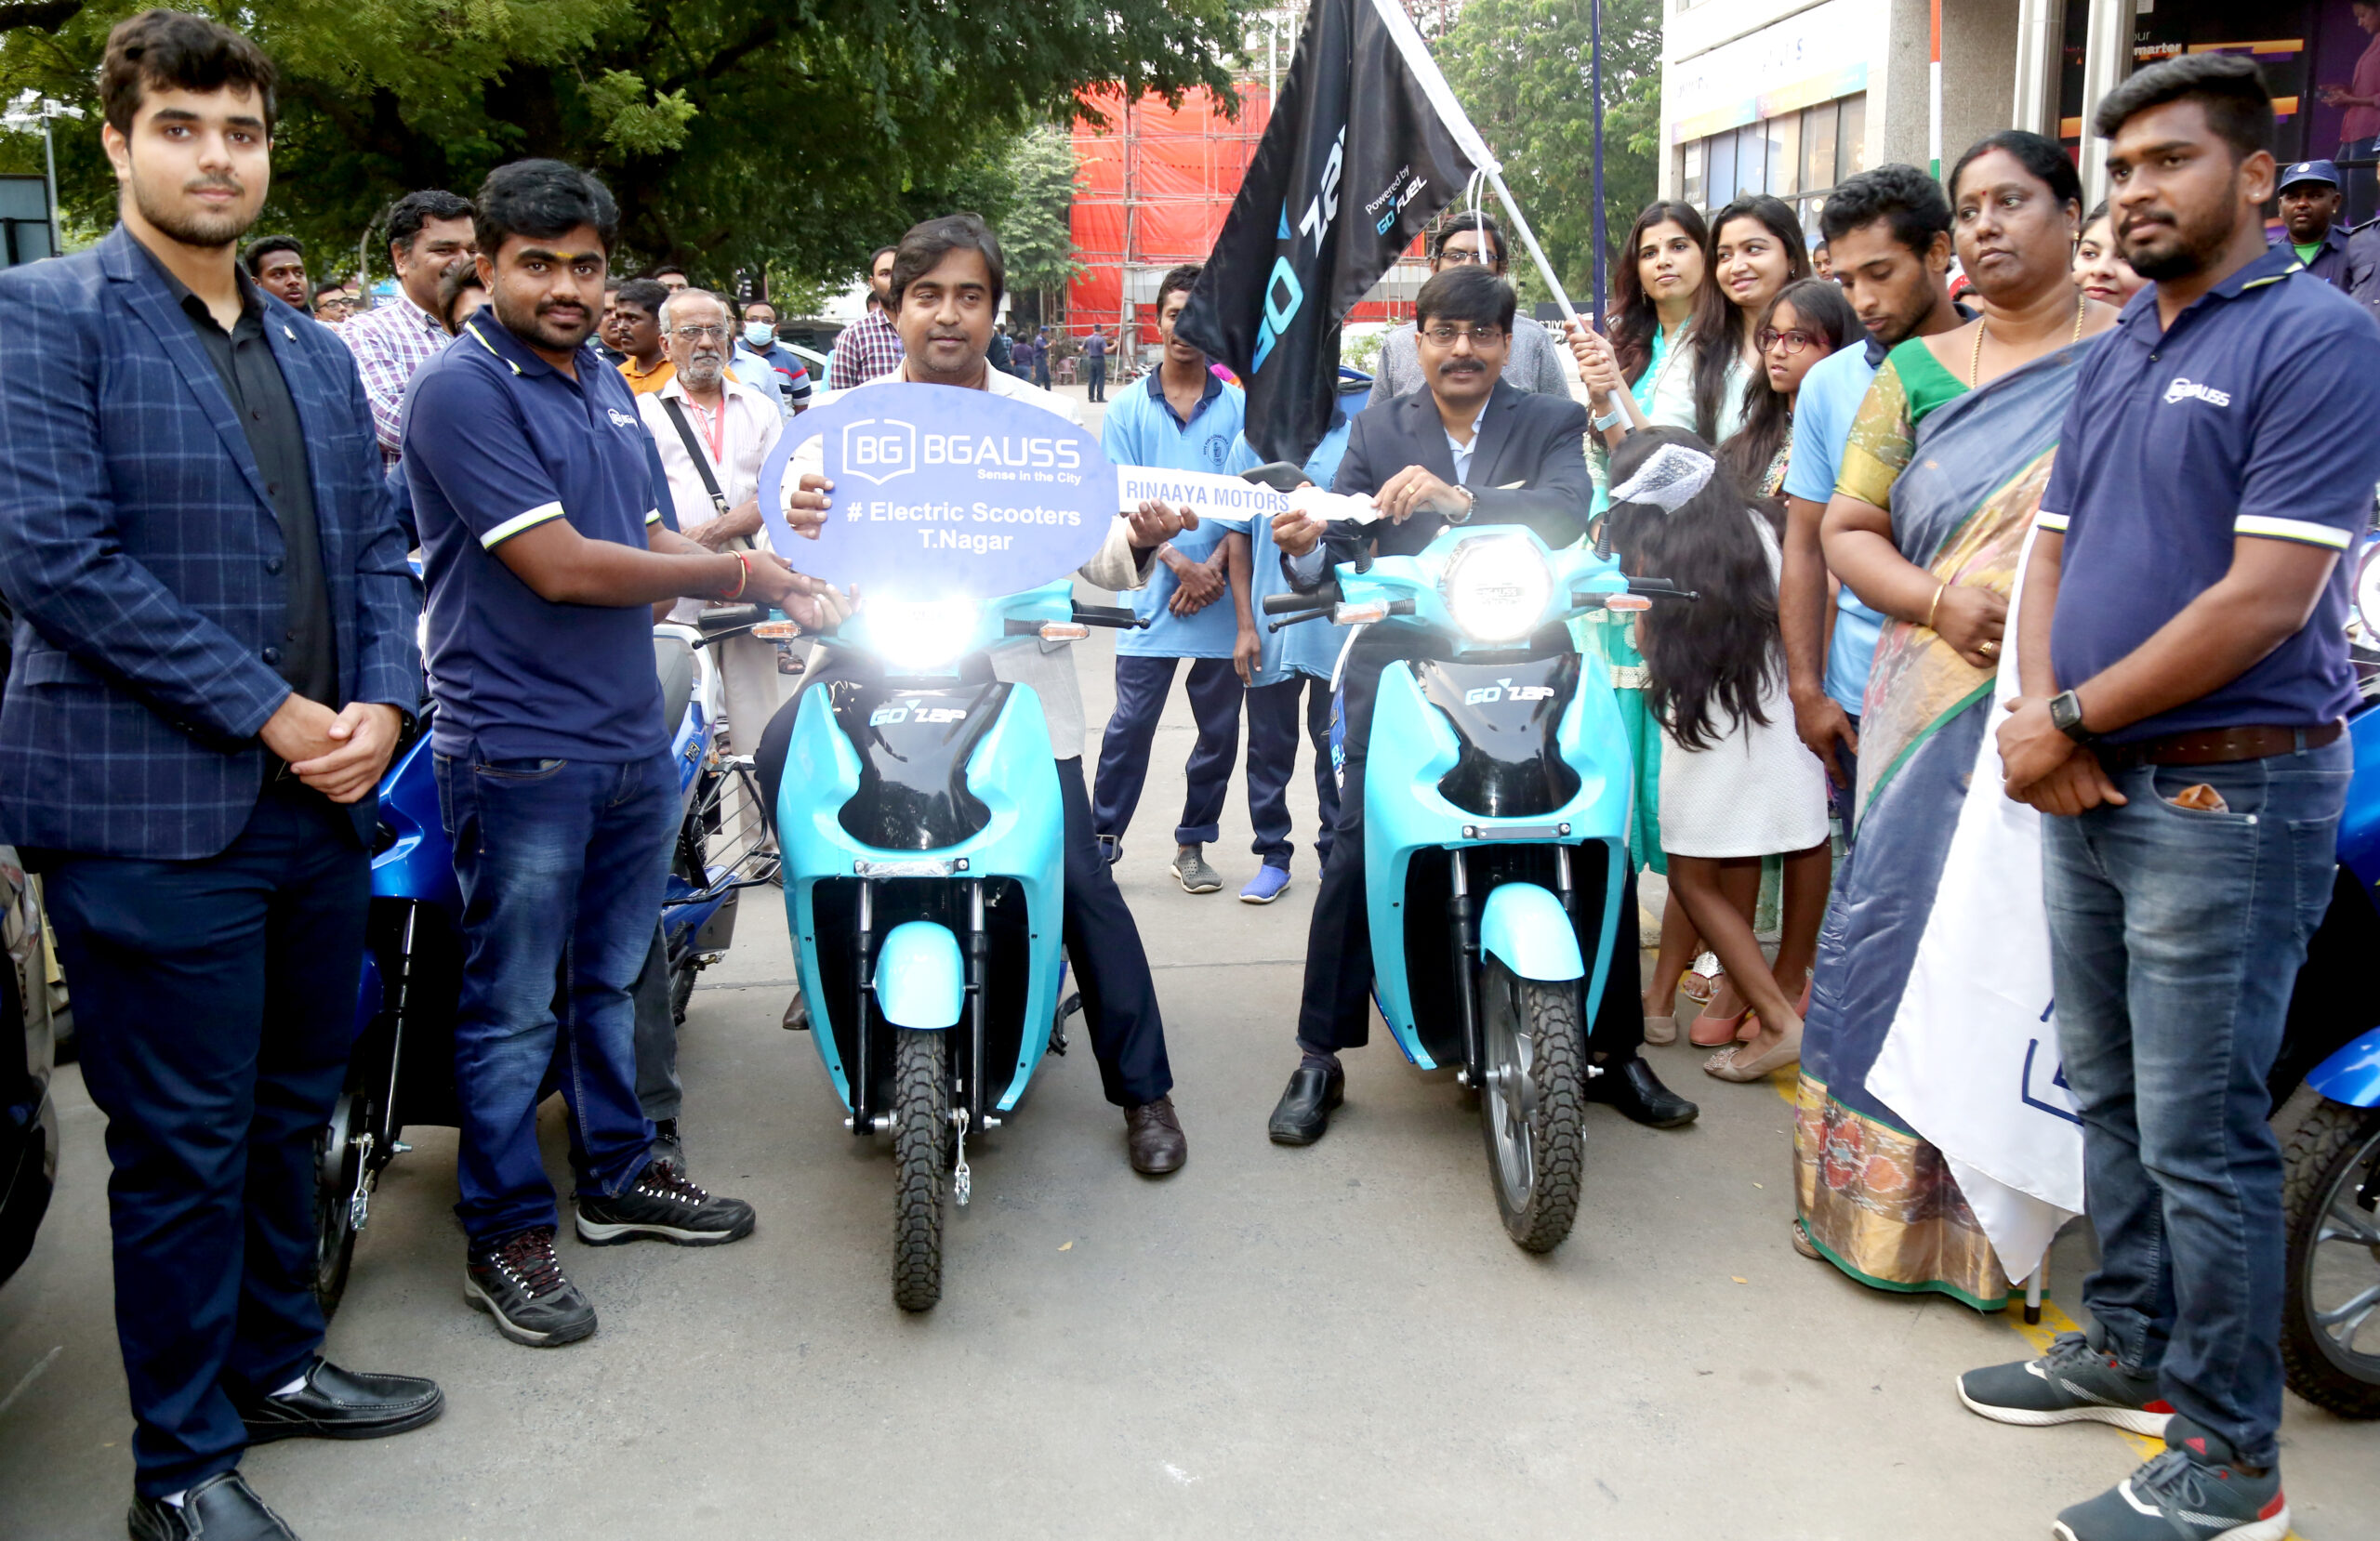 Eco Friendly Electric Scooters launched to Avoid environmental pollution by BGauss Hemant Kabra, Go Zap  Muthuraman & Vinodh Raj donated 50 vehicles to Food Delivery Companies.